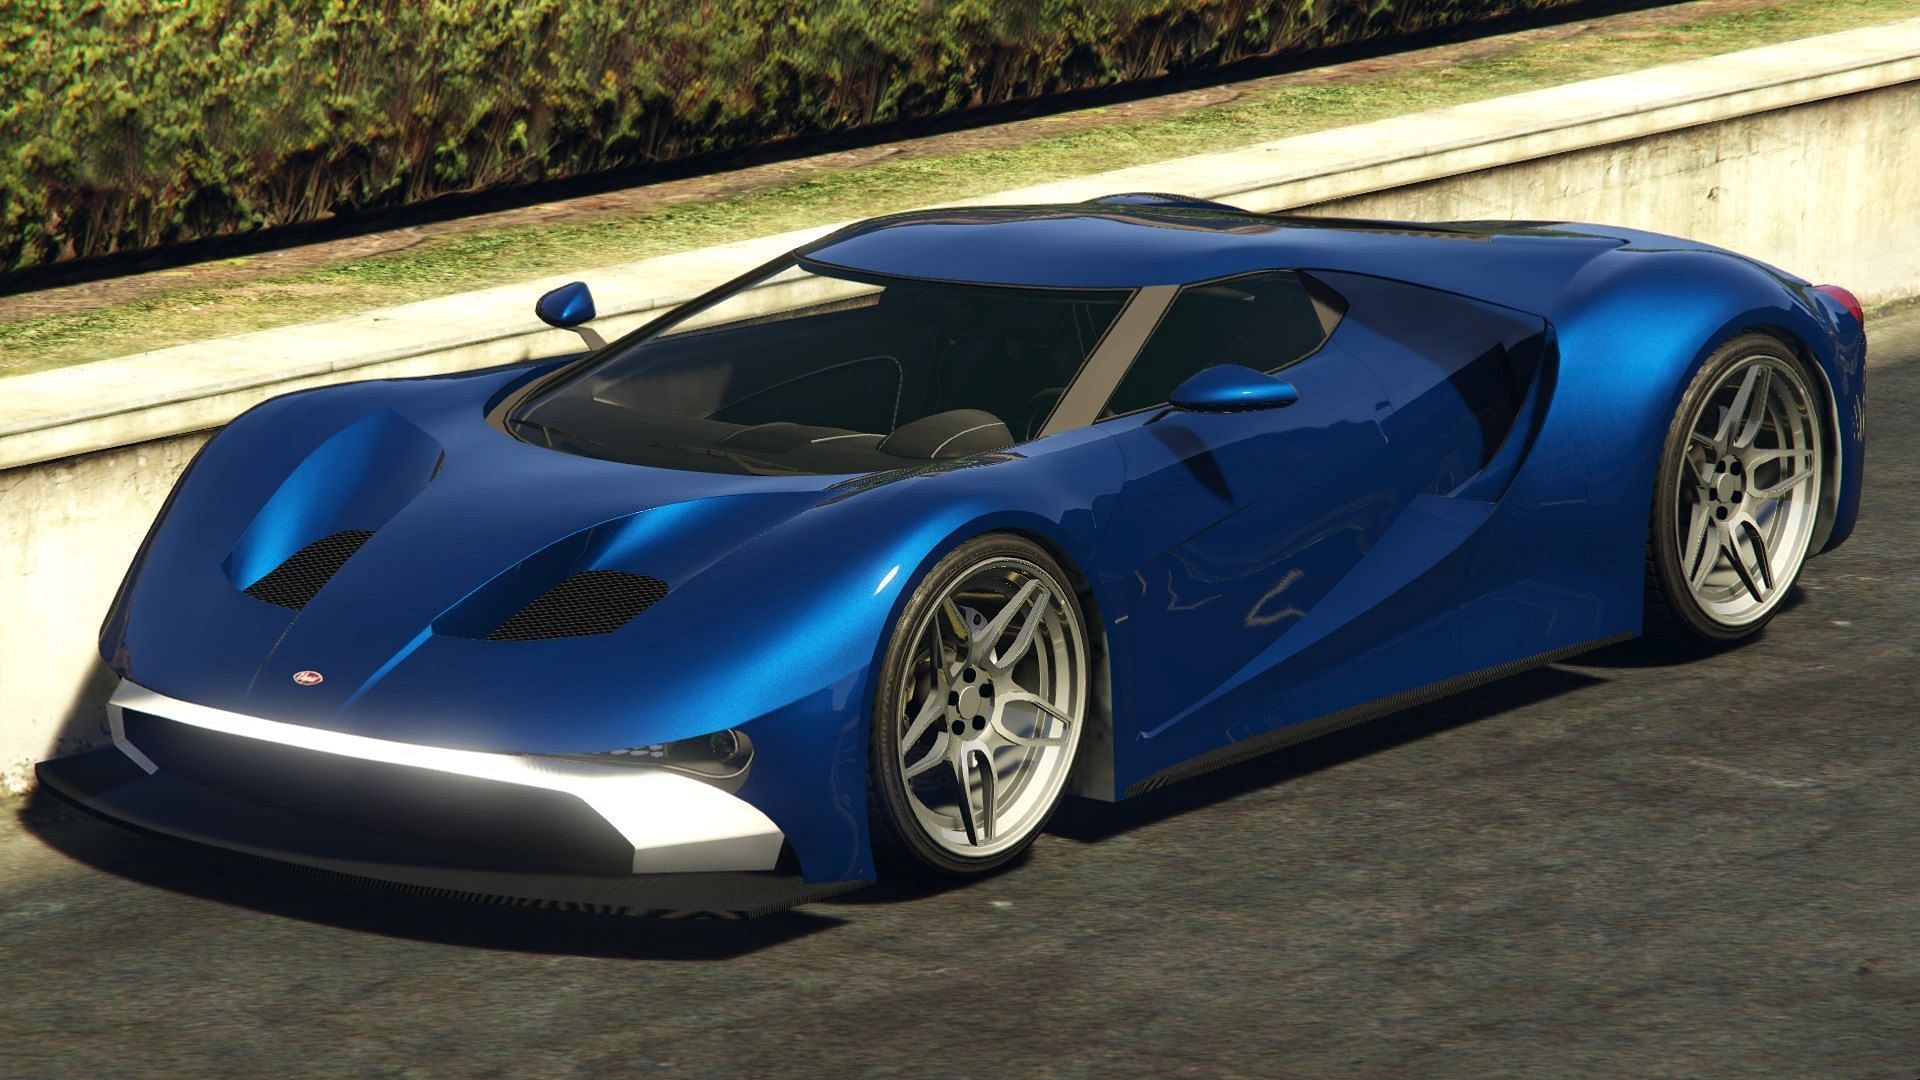 The Vapid FMJ can be won at the LS Car Meet in GTA Online this week (Image via GTA WiKi)